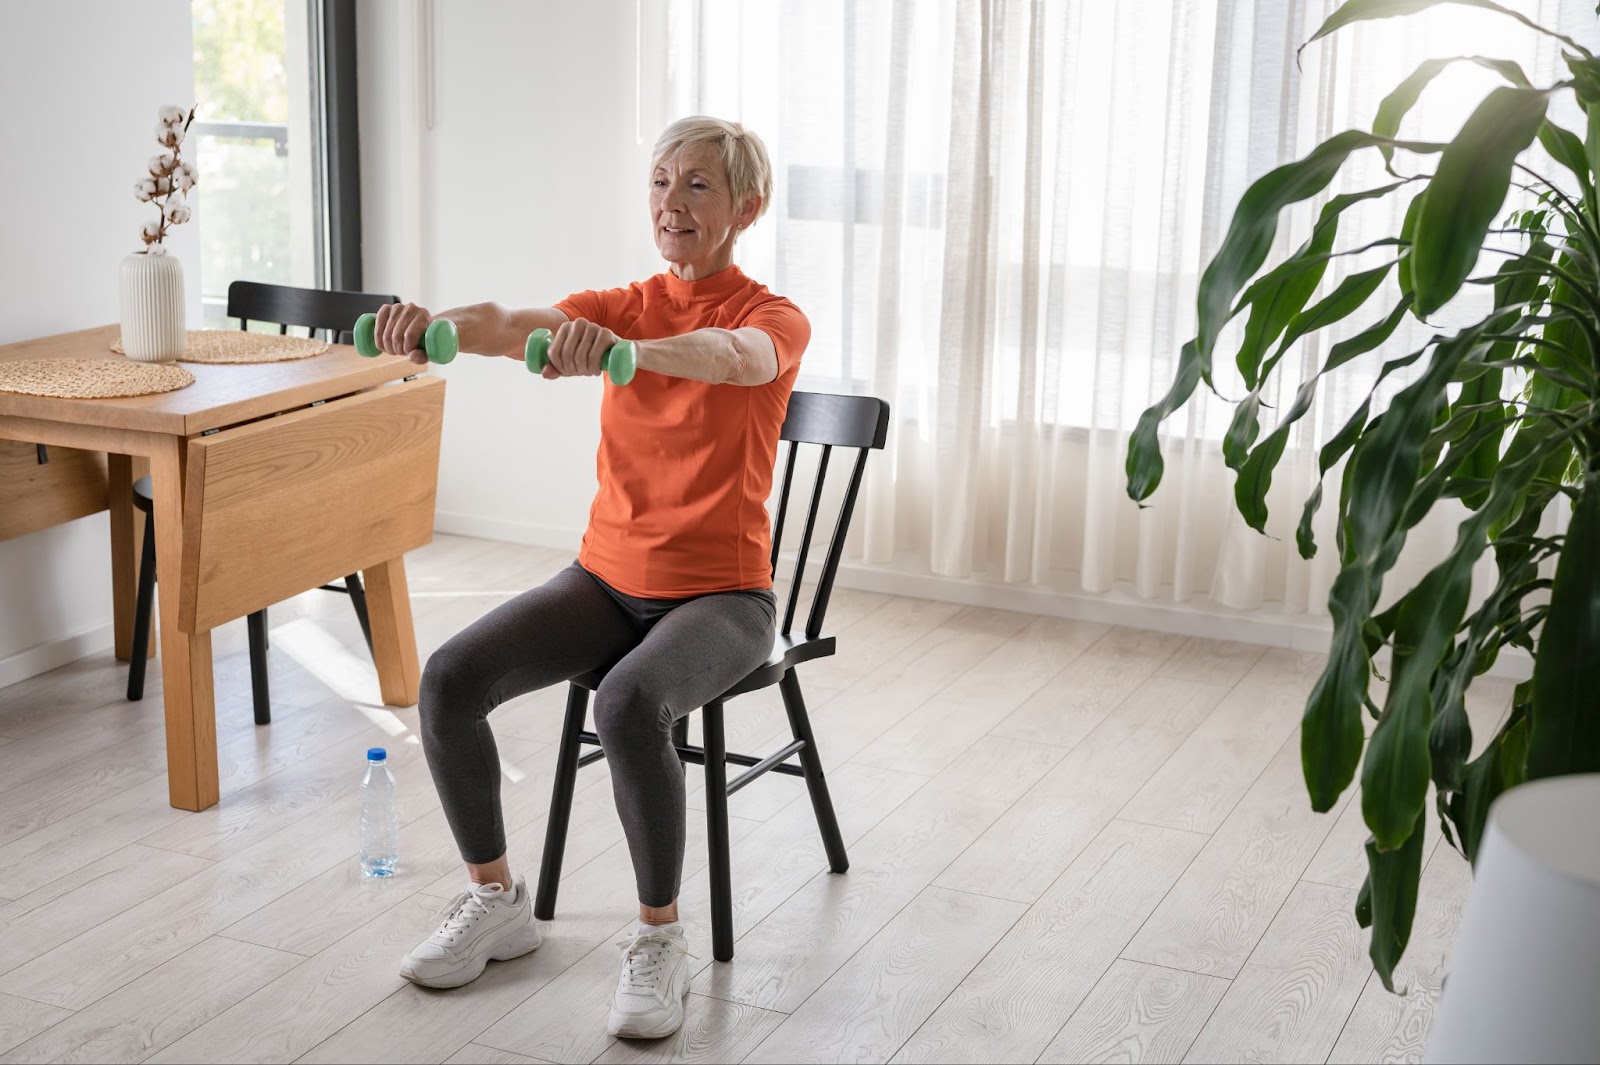 Smiling mature woman exercising while seated indoors.